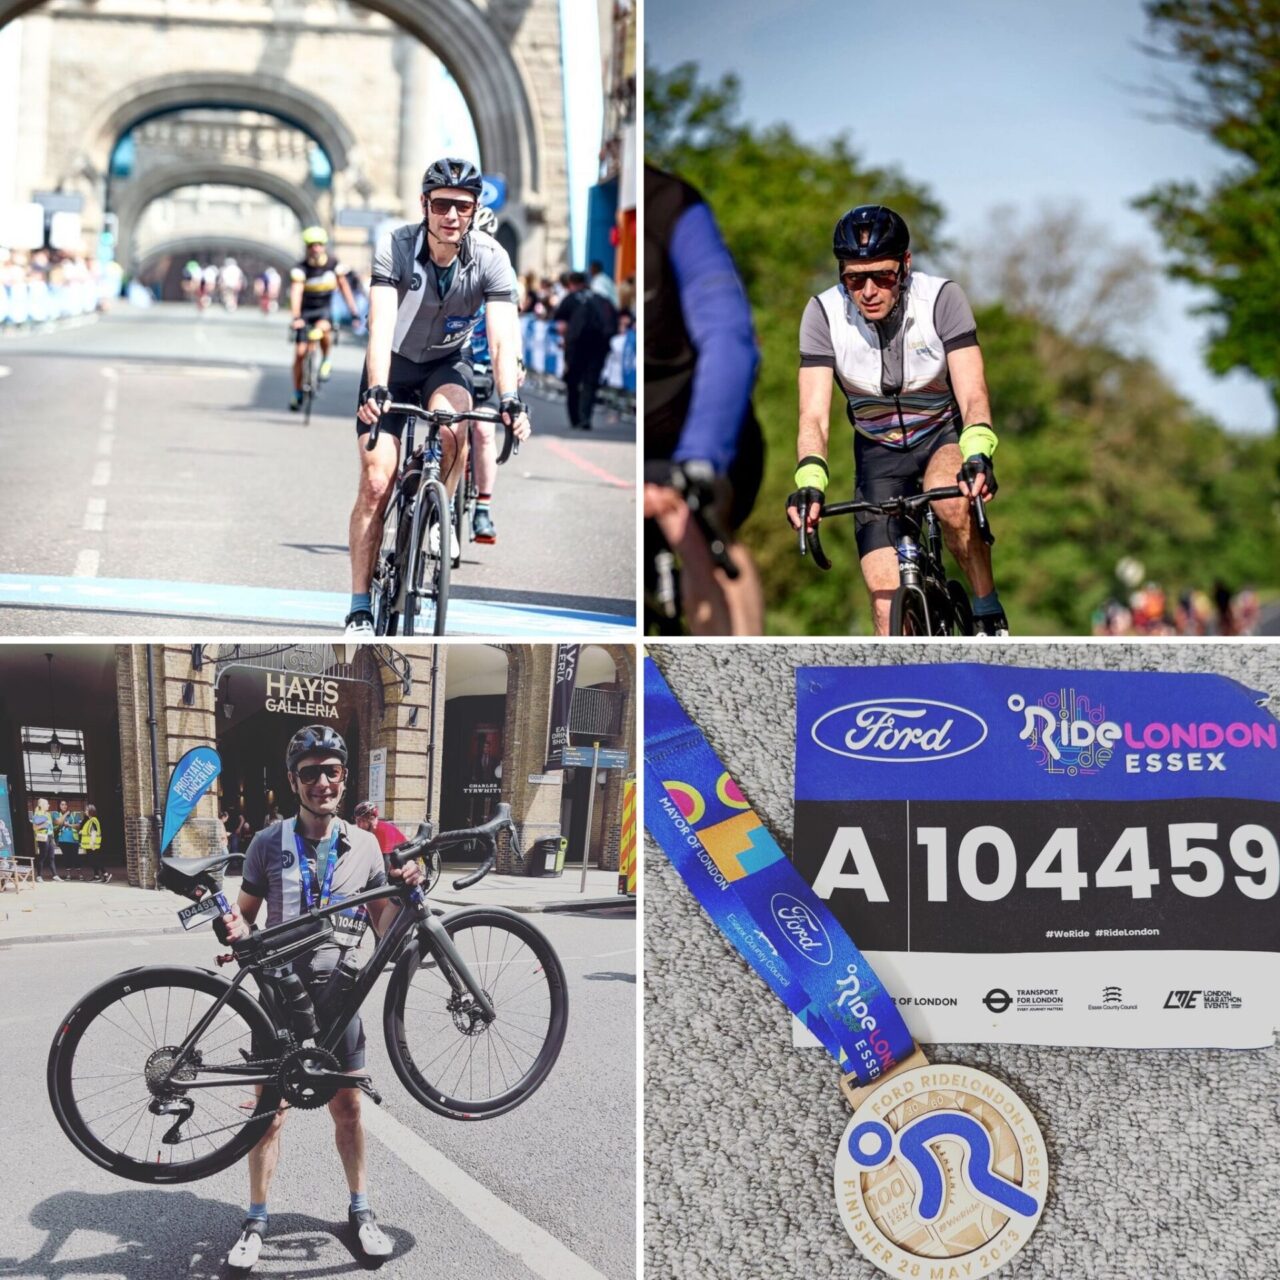 A collage of photos with bicycles and medals.